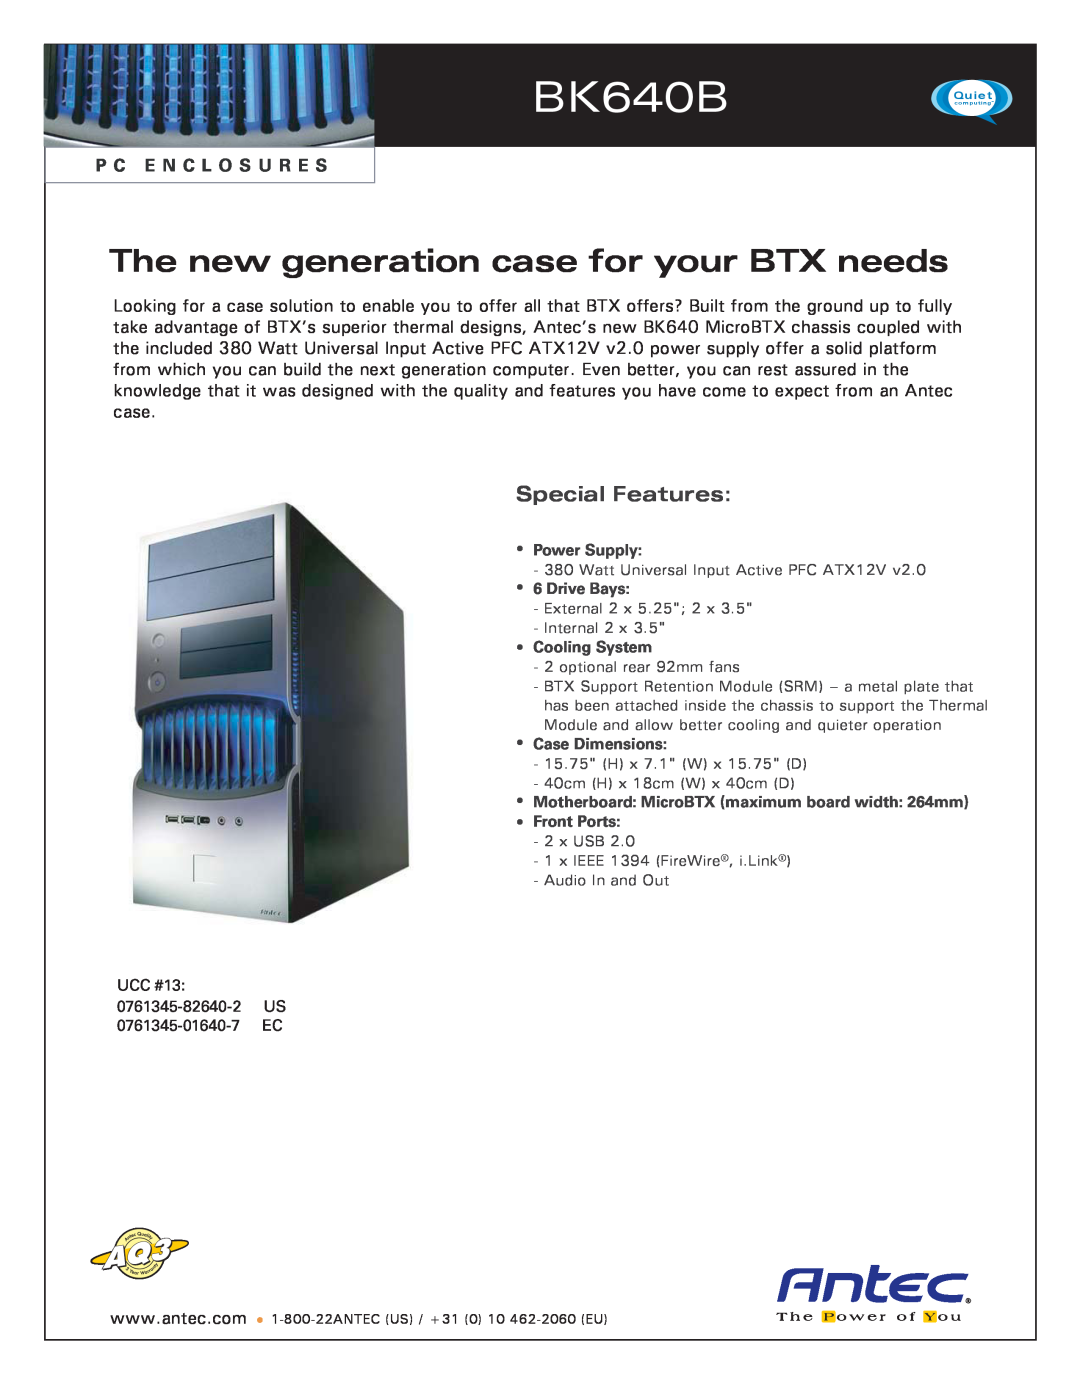 Antec BK640B dimensions The new generation case for your BTX needs, Special Features, P C E N C L O S U R E S 